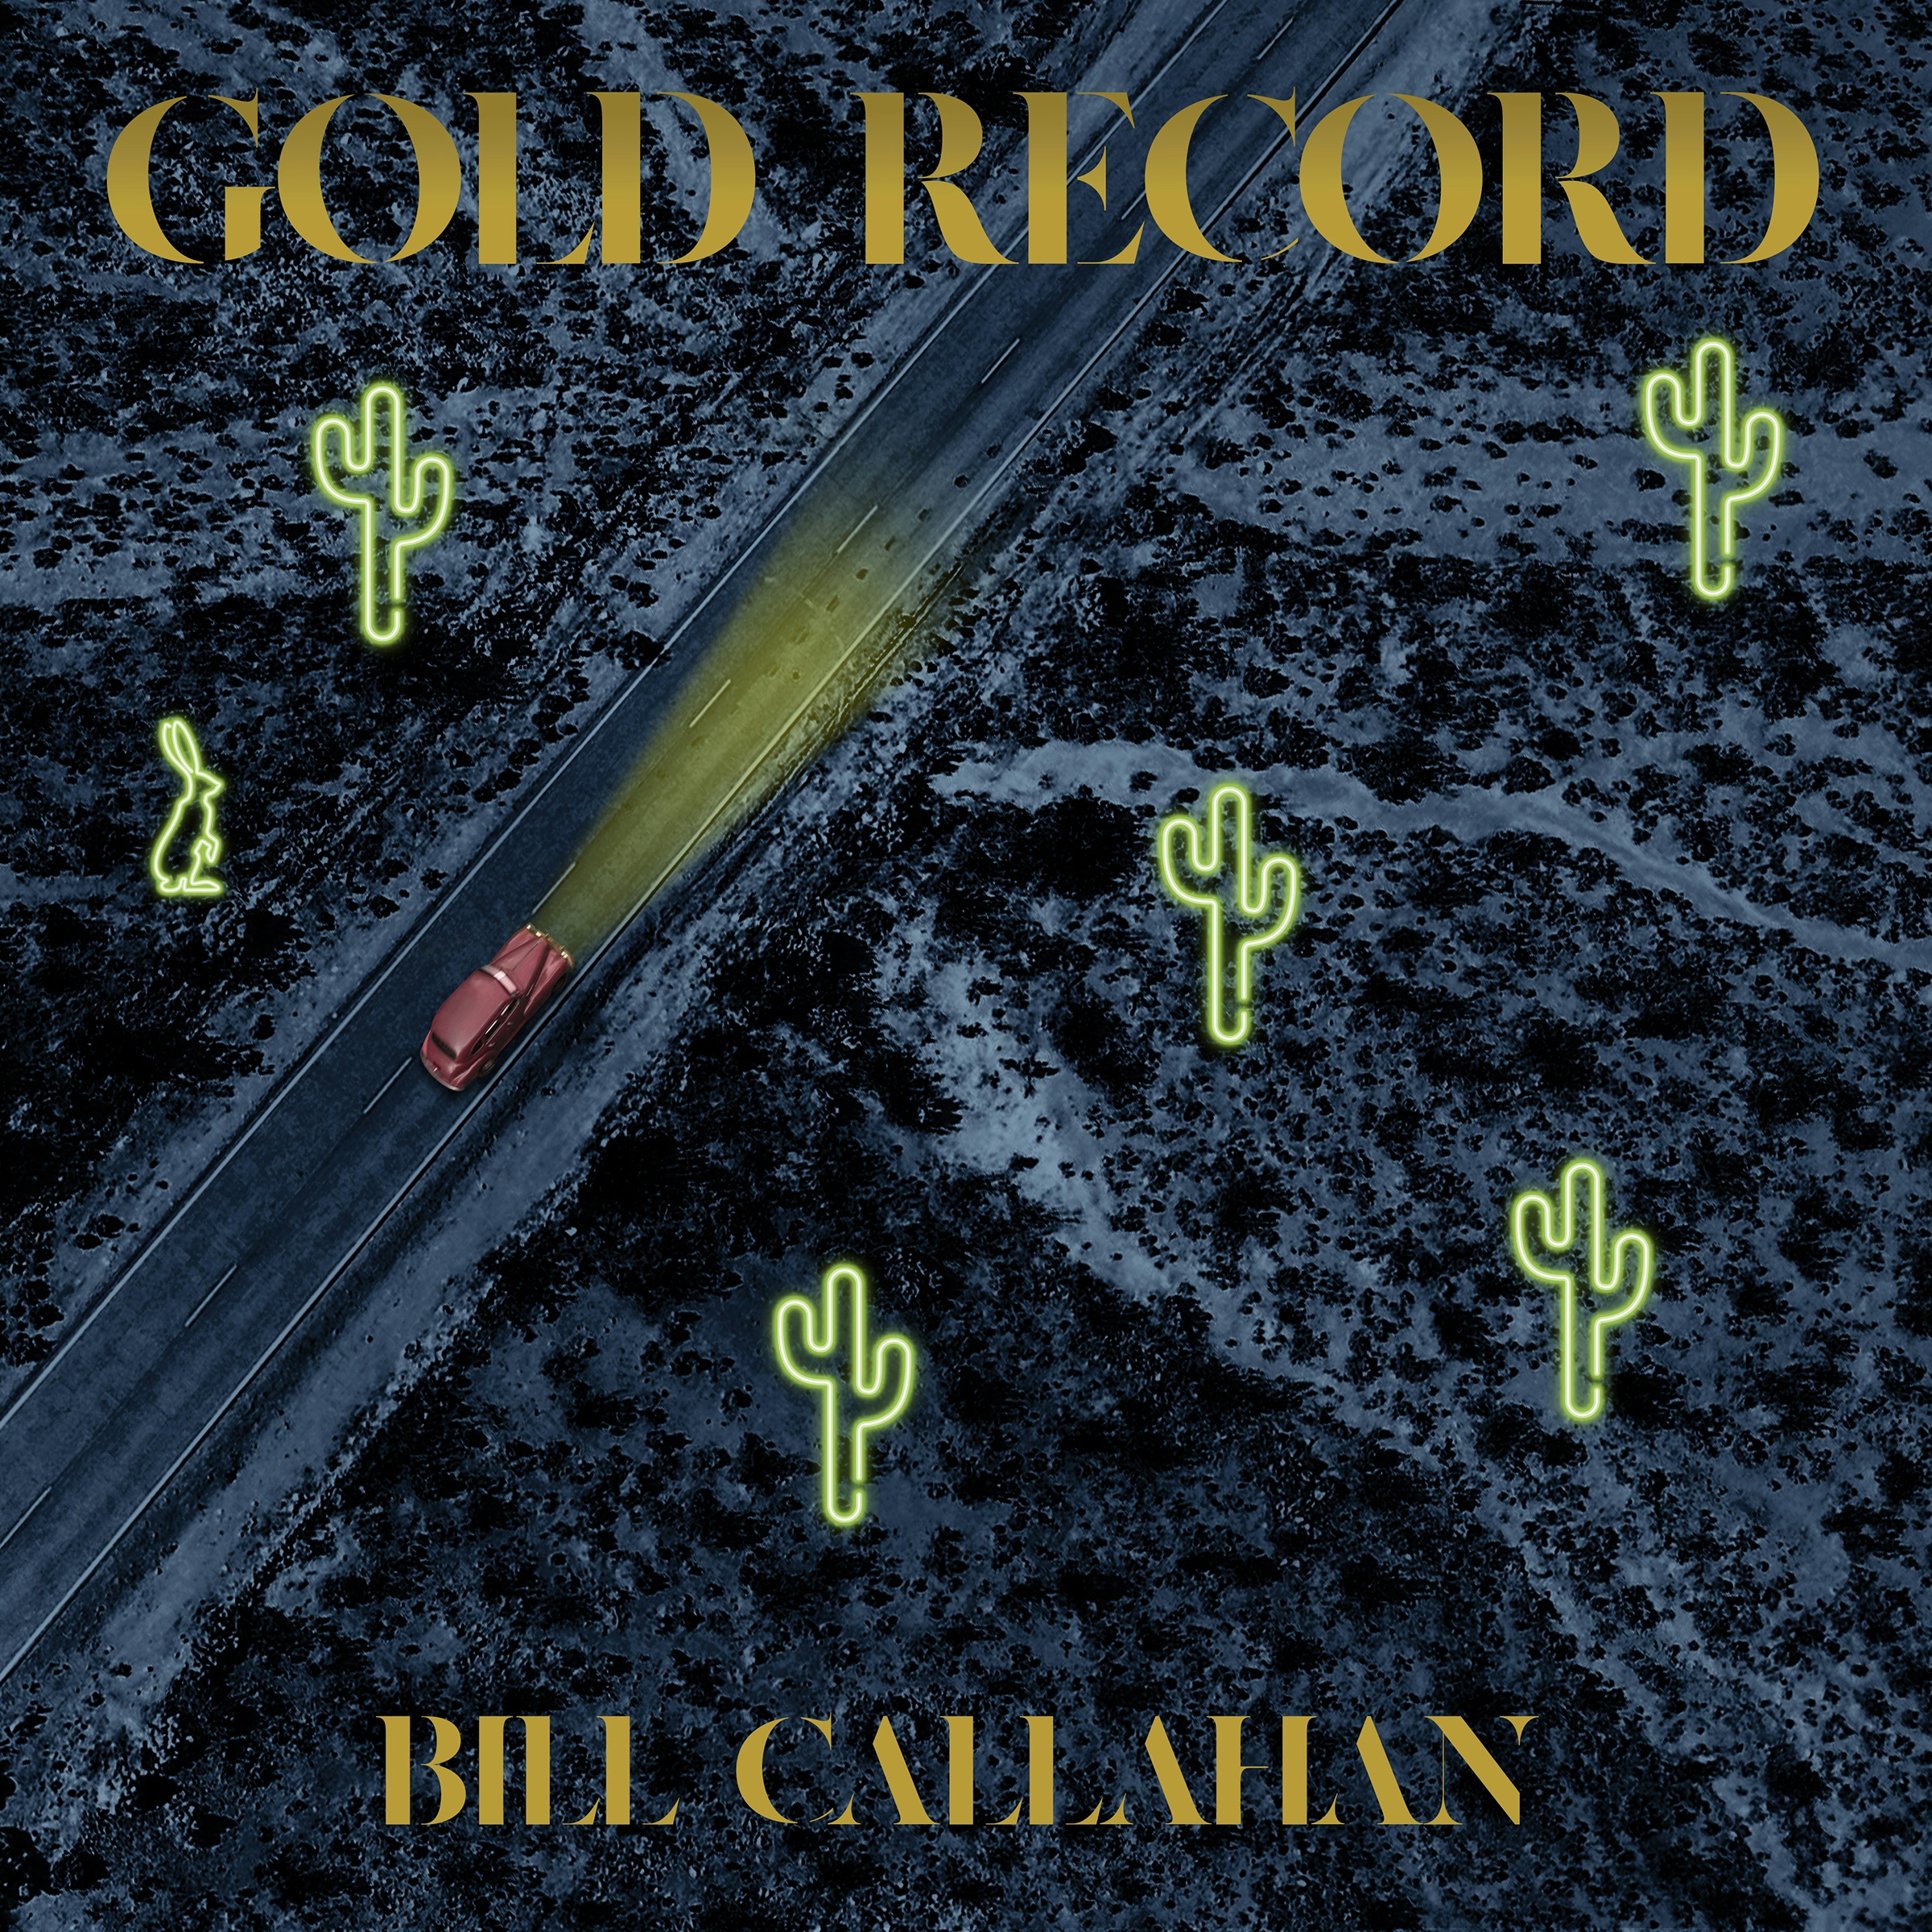 Album artwork for Gold Record by Bill Callahan